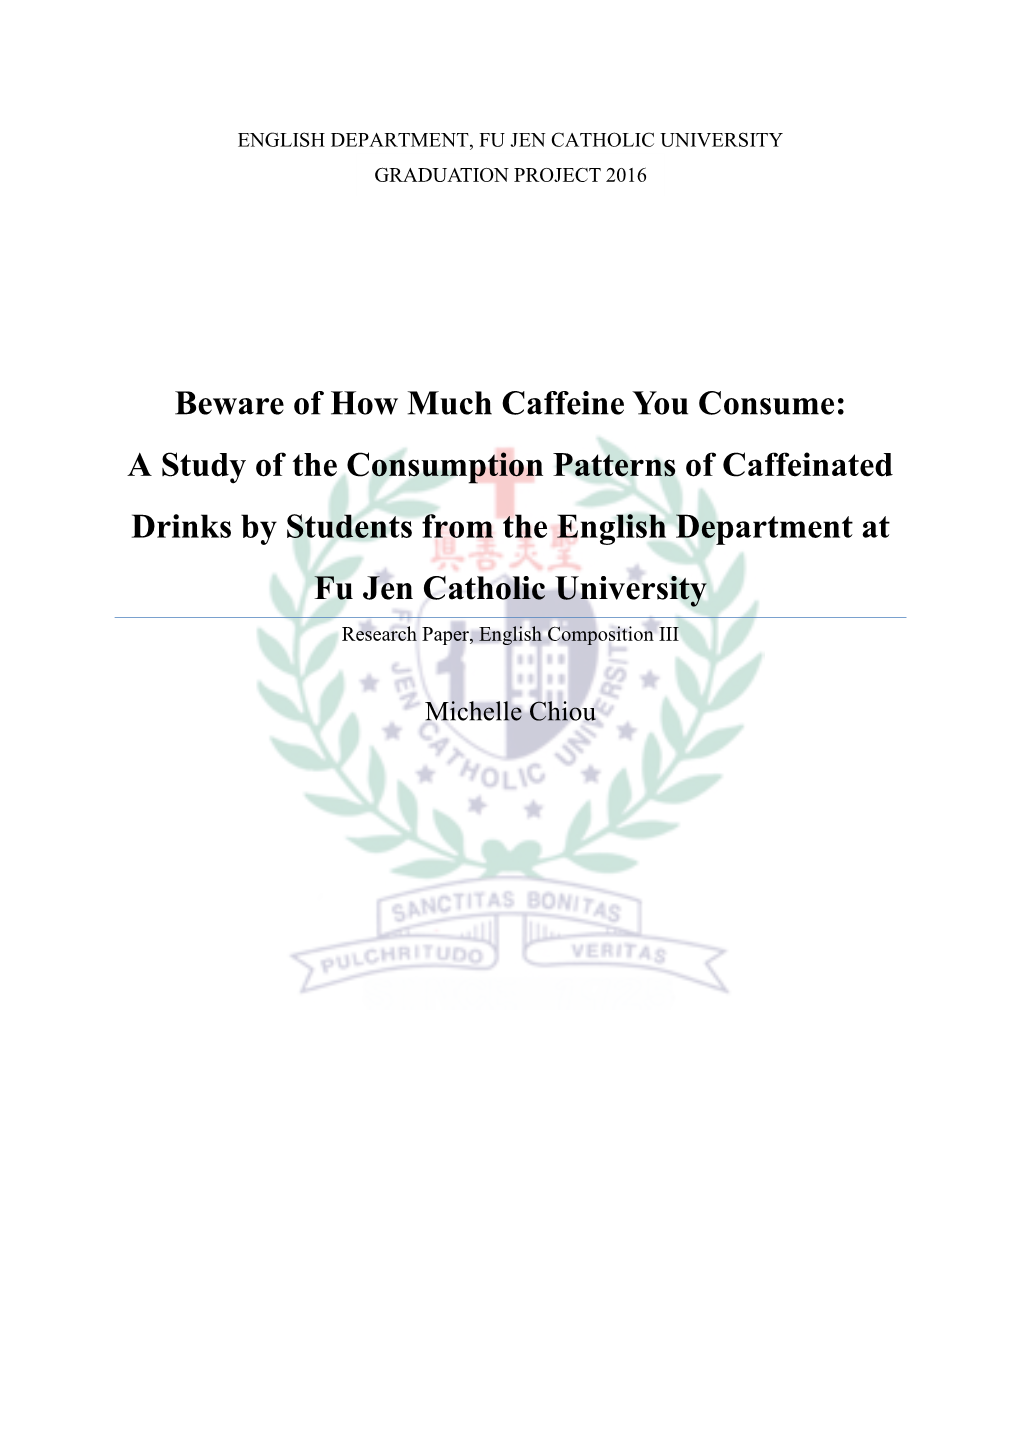 Beware of How Much Caffeine You Consume:A Study of The